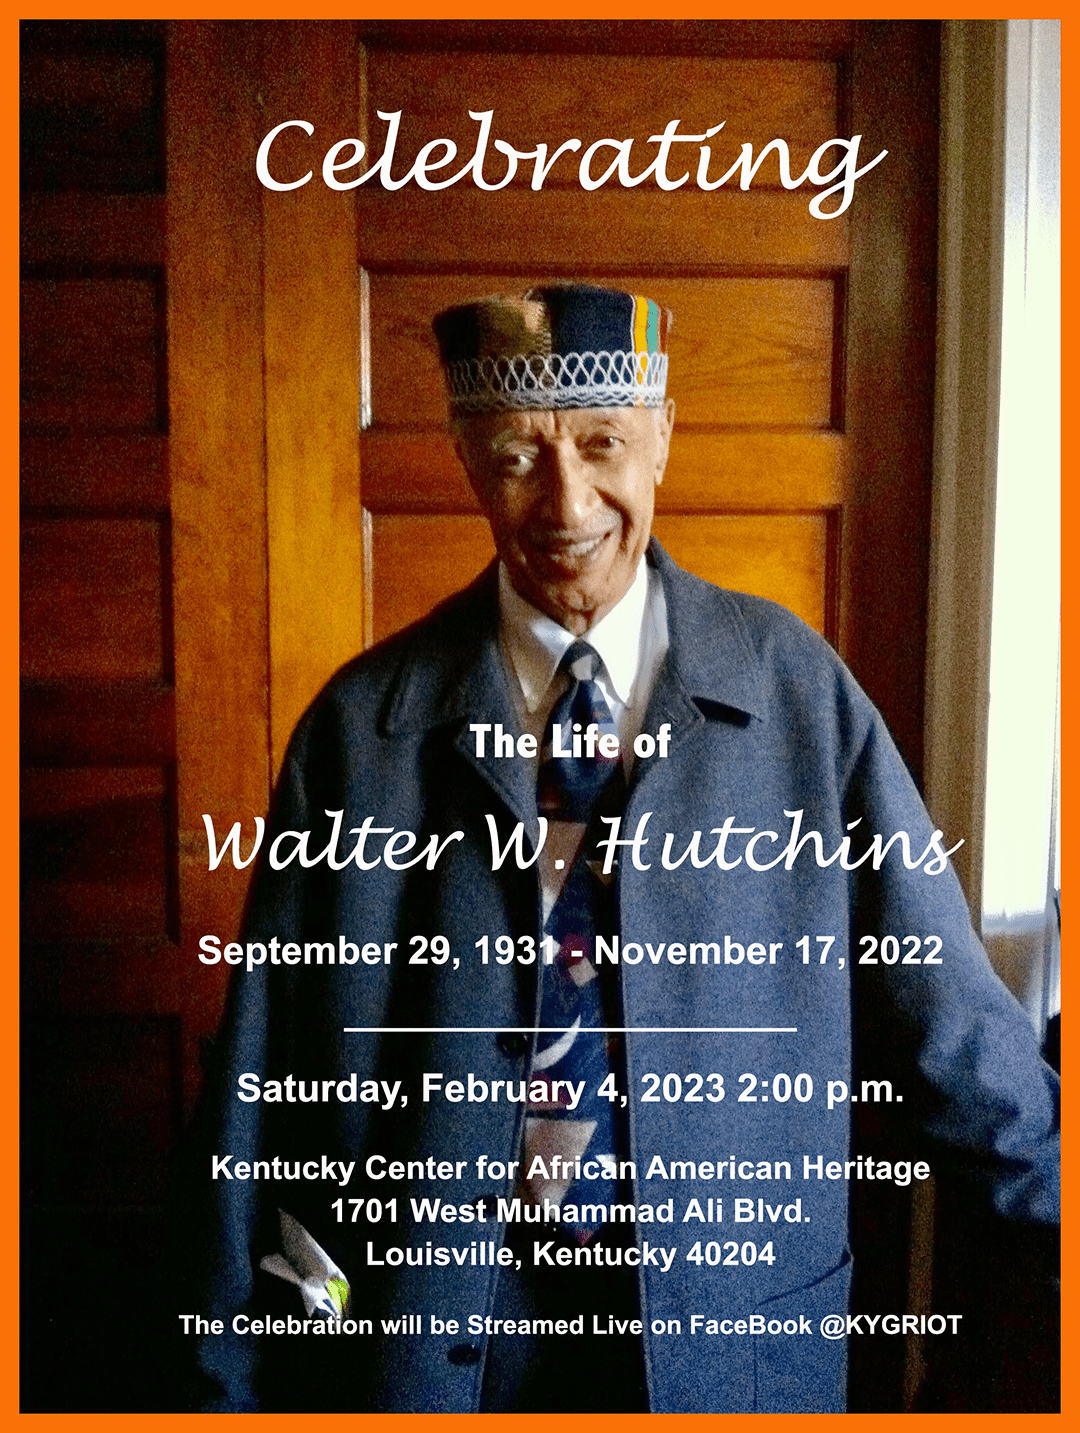 Walter W. Hutchins funeral announcement